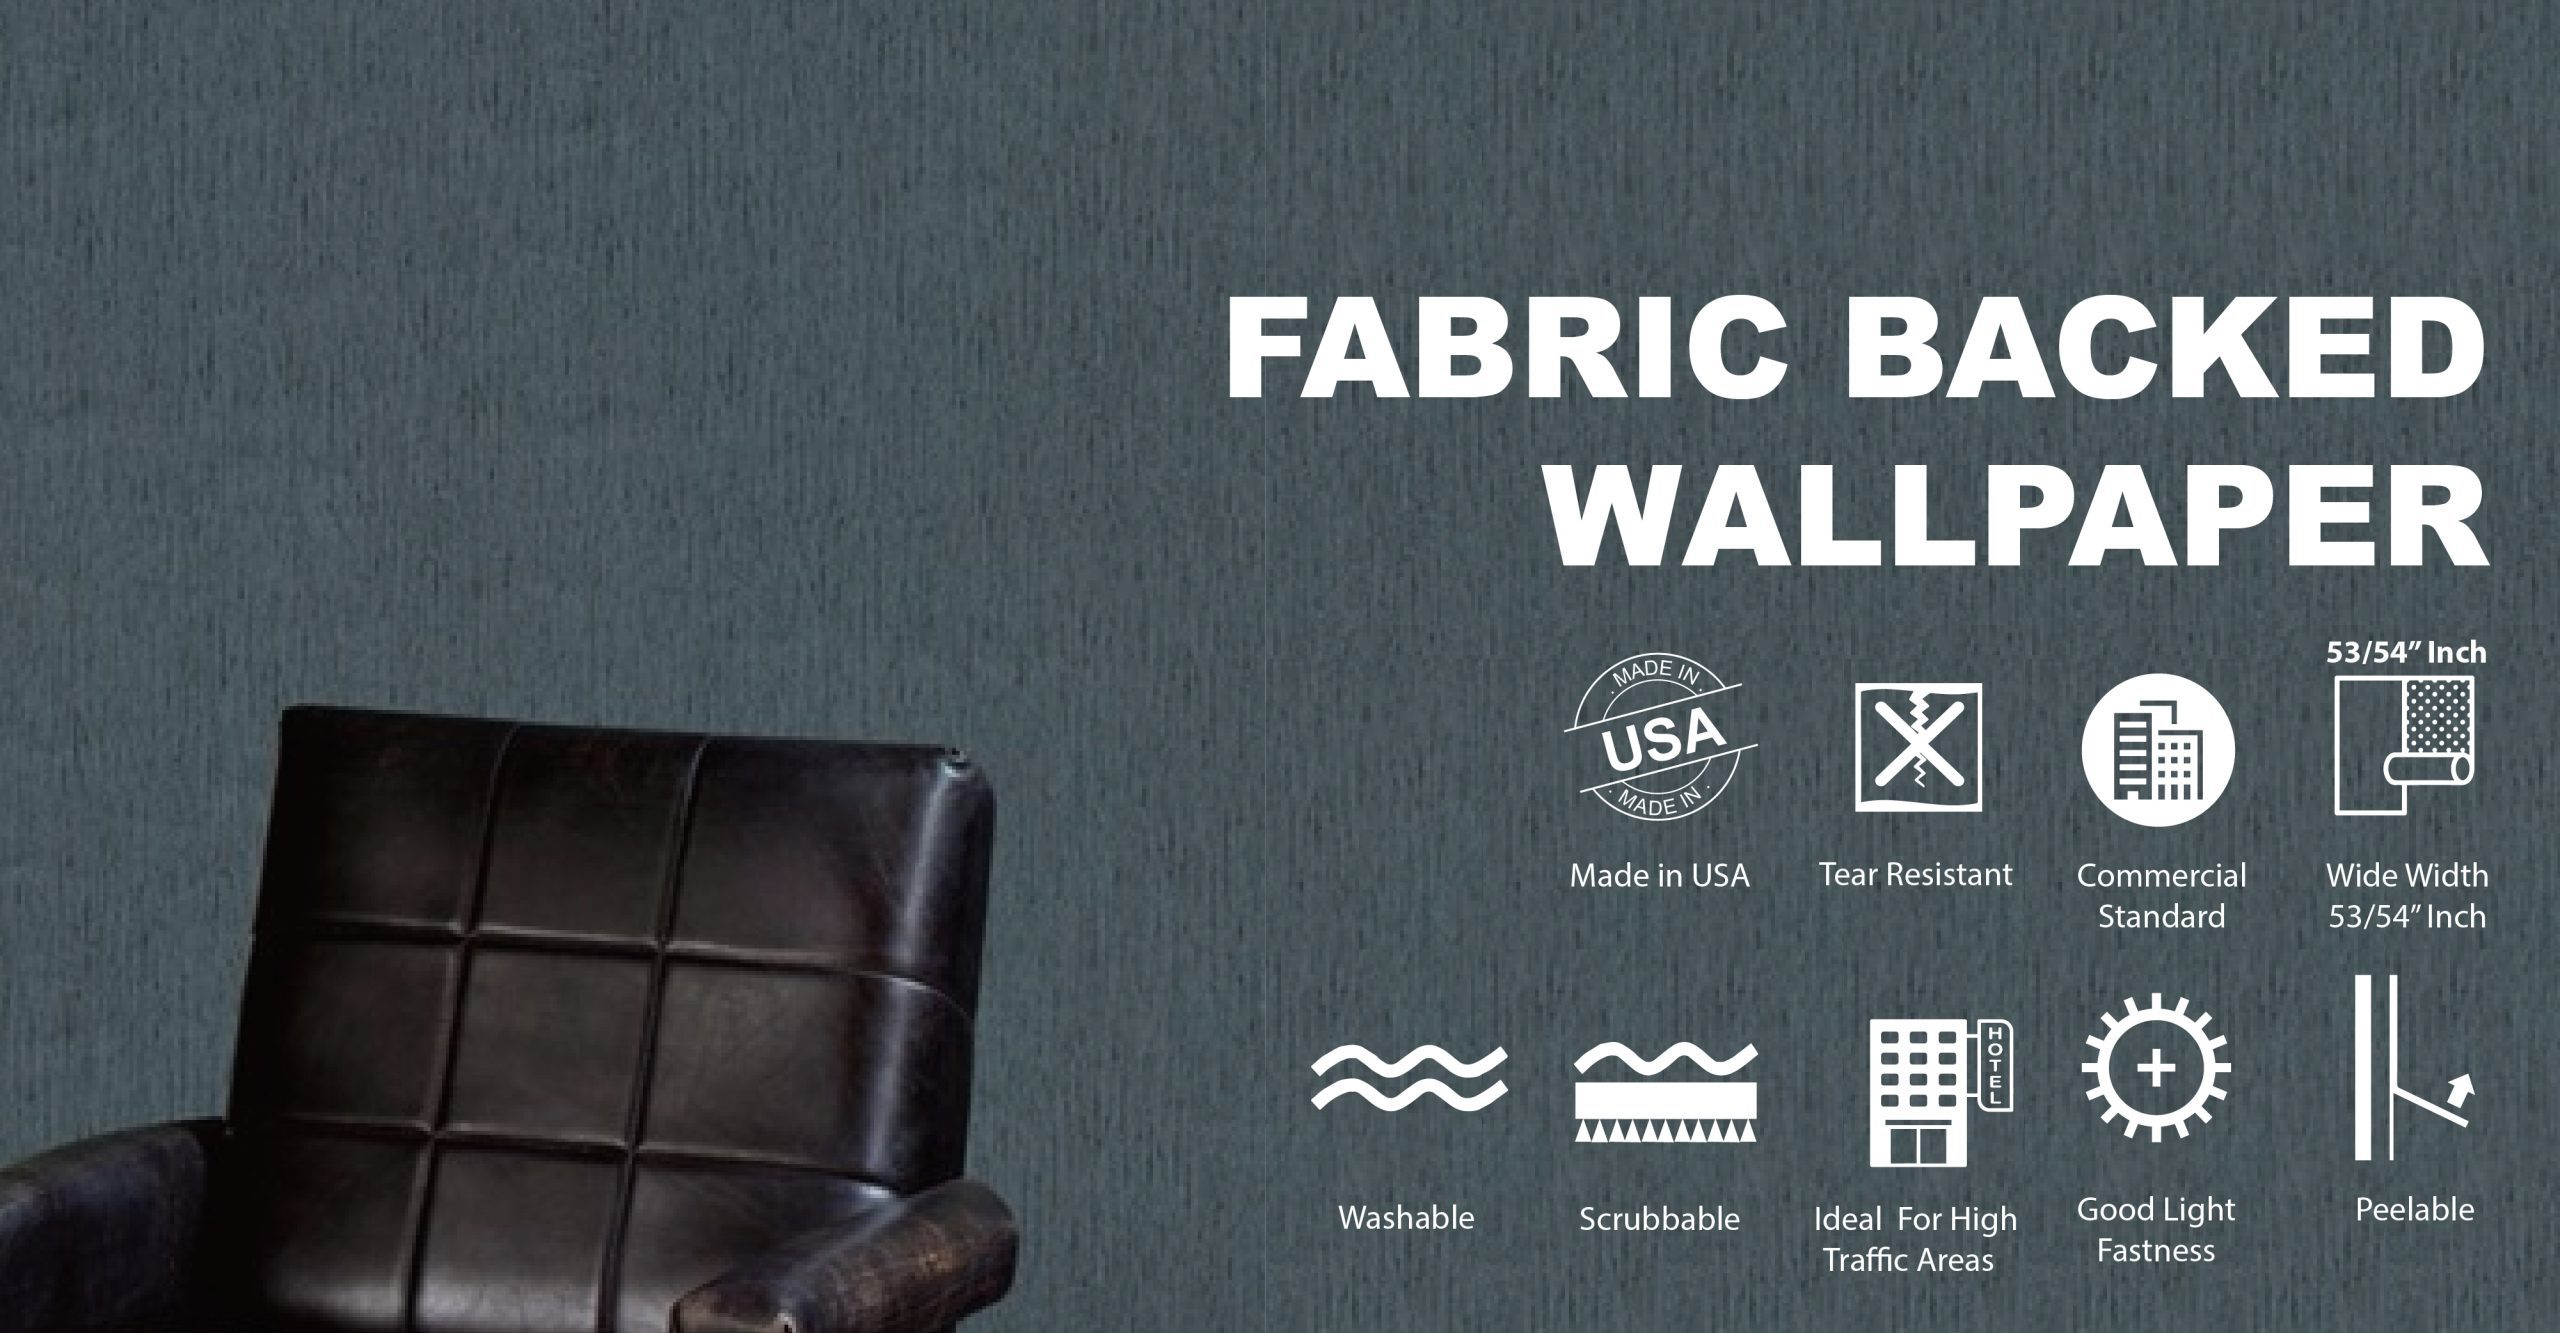 Fabric Backed Wallpaper